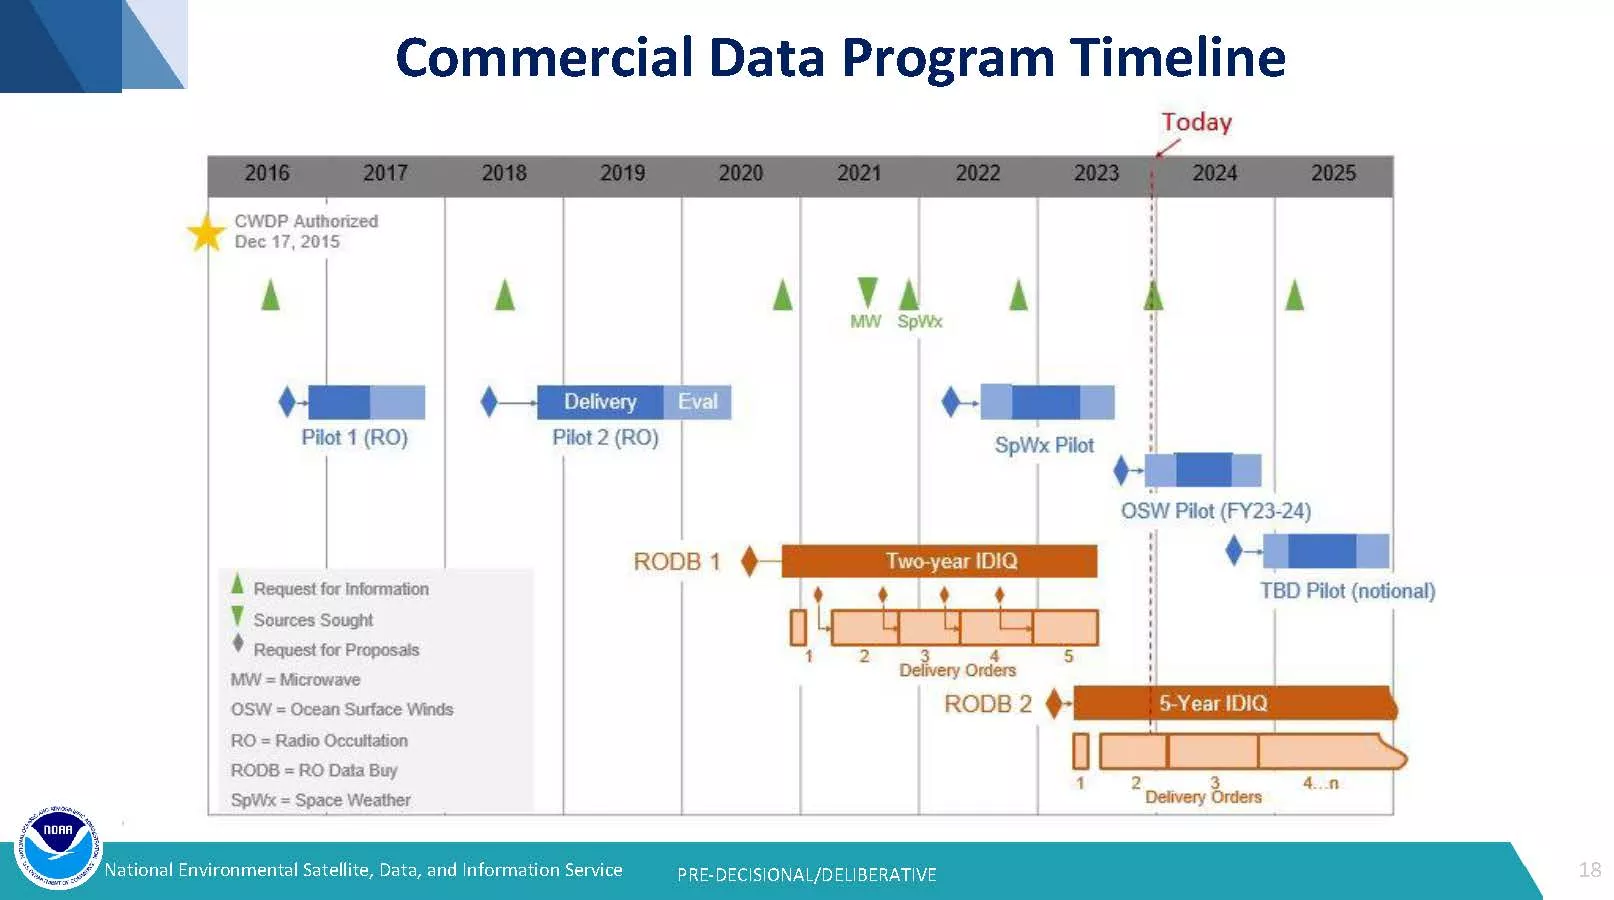 Timeline diagram for Commercial Data Program Timeline slide. Pilot-1 for RO data from mid-2016 to late-2017.  Pilot-2 for RO data from late-2018 to early-2020.  Space Weather Pilot from mid-2022 to late-2023. Ocean Surface Winds Pilot from late-2023 to late-2024. An undetermined pilot from late-2024 to late-2025.  RODB-1 ran from late-2020 to mid-2023. RODB-2 runs from mid-2023 for 5 years.